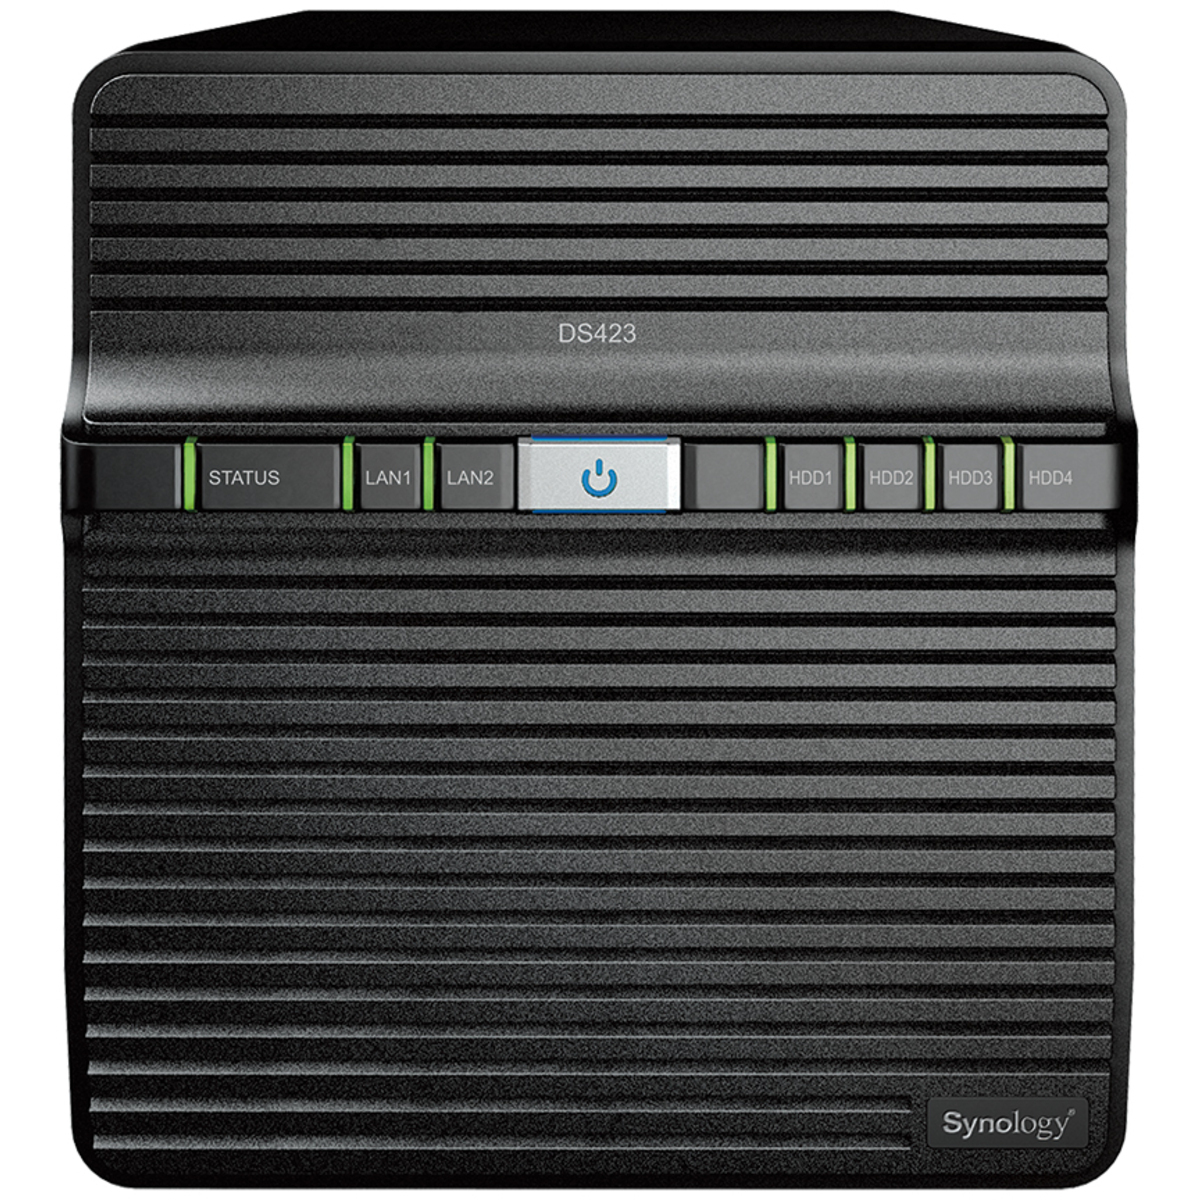 Synology DiskStation DS423 2tb 4-Bay Desktop Personal / Basic Home / Small Office NAS - Network Attached Storage Device 2x1tb Sandisk Ultra 3D SDSSDH3-1T00 2.5 560/520MB/s SATA 6Gb/s SSD CONSUMER Class Drives Installed - Burn-In Tested DiskStation DS423